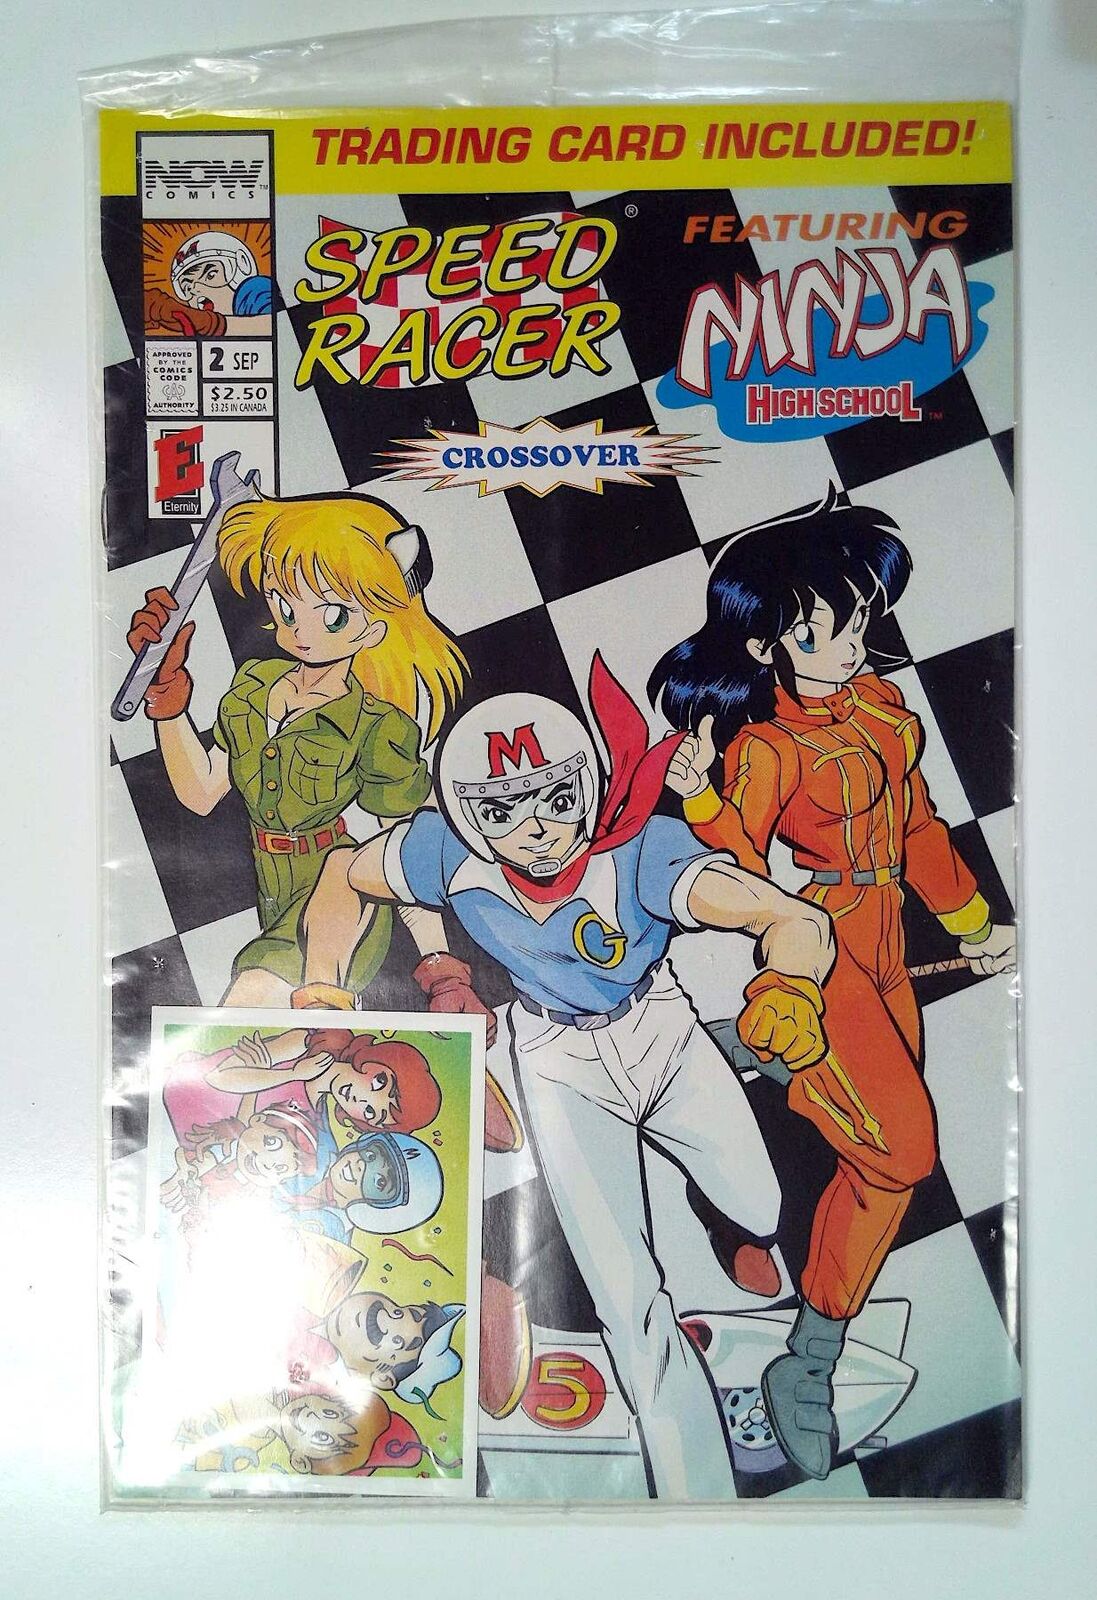 Speed Racer featuring Ninja High School #2 Now 1993 Poly Bagged Comic Book